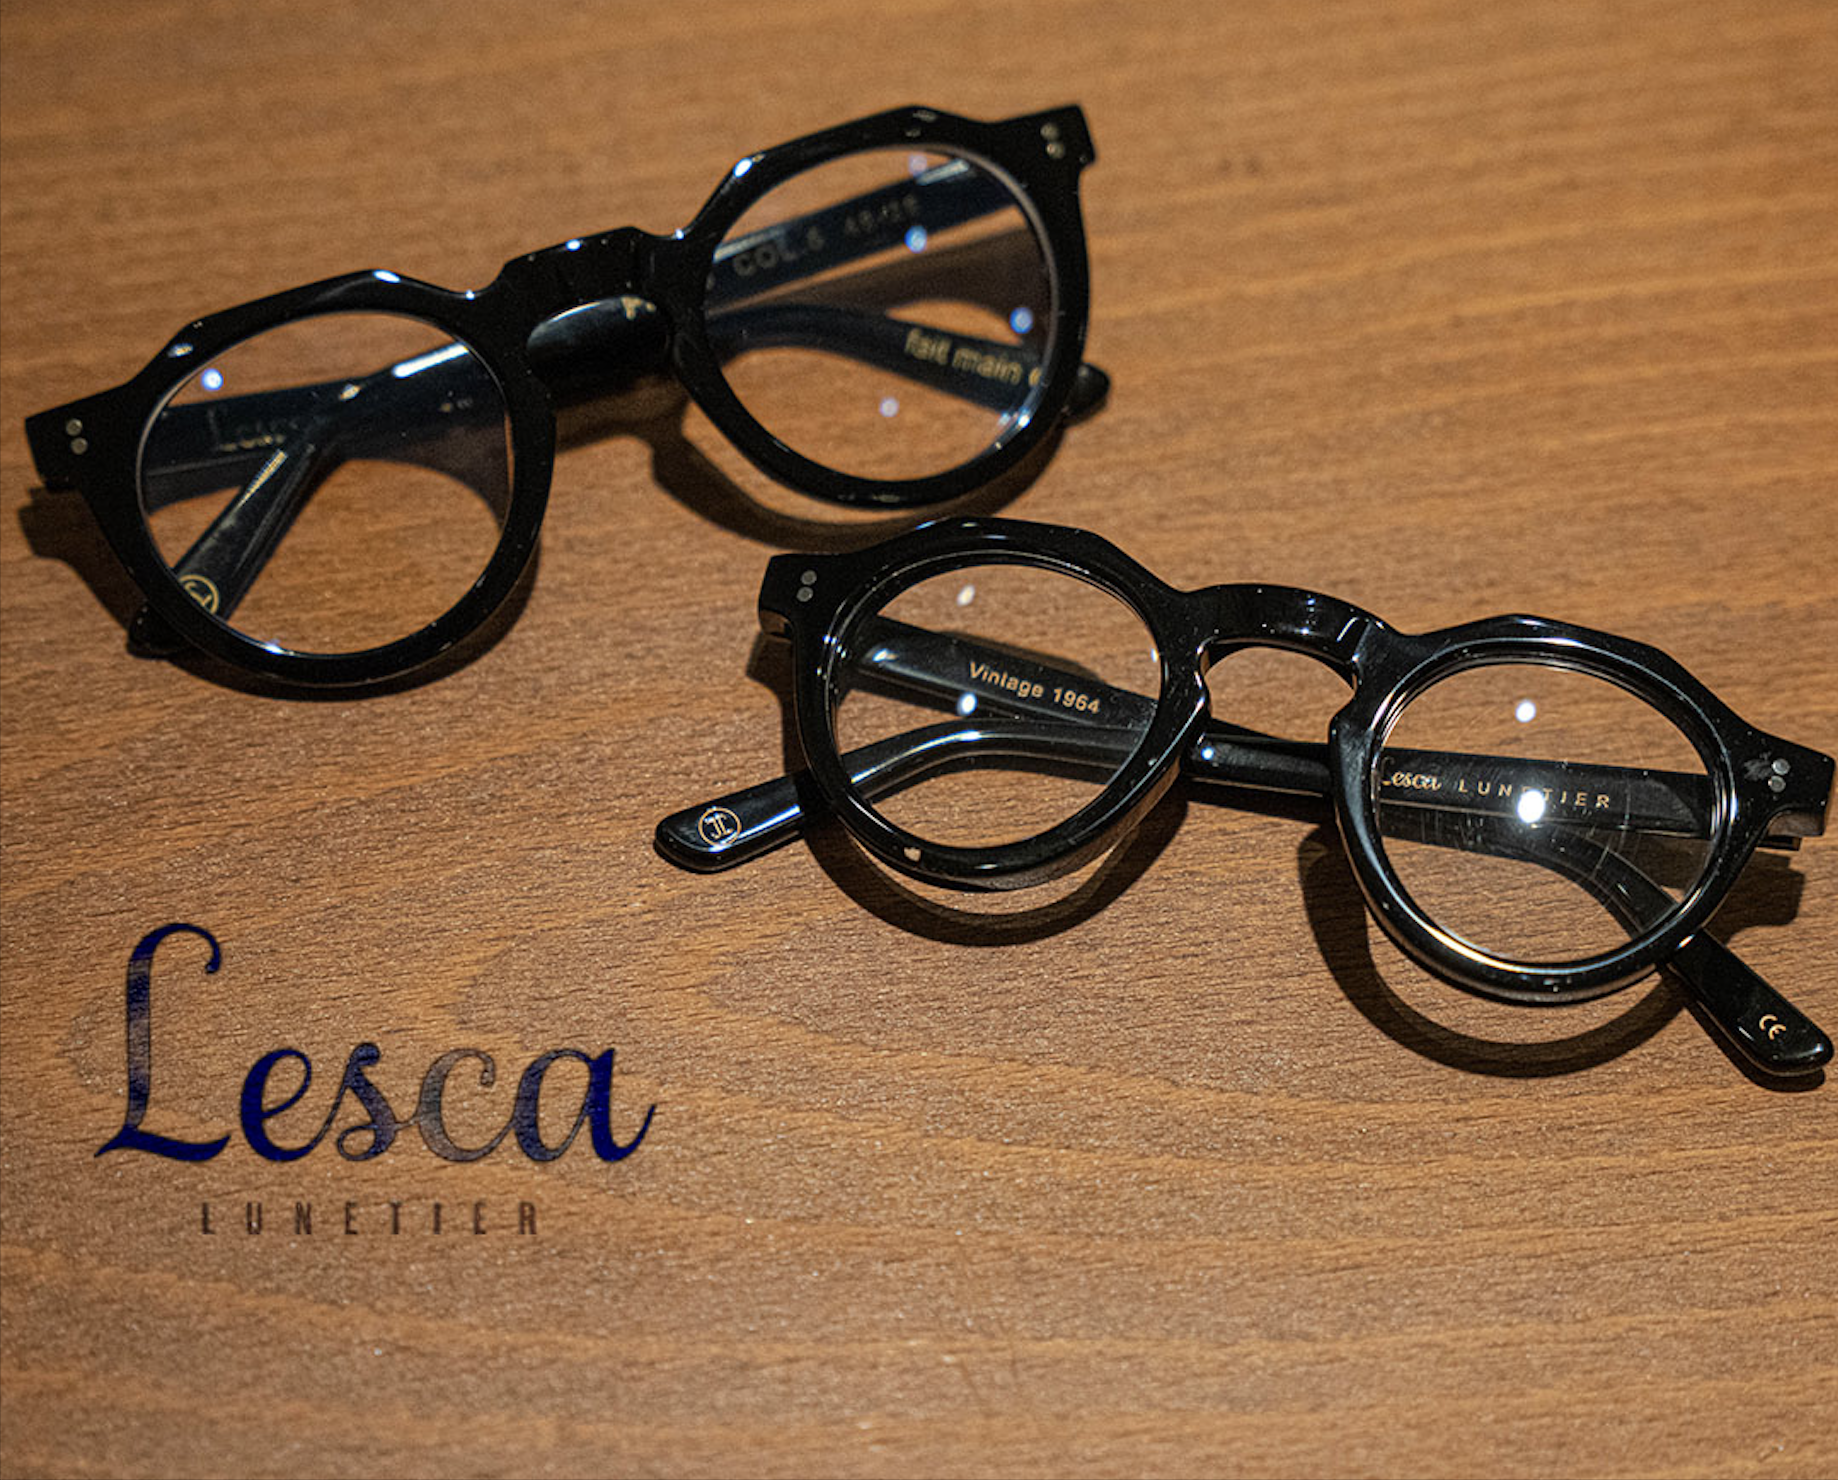 Lesca Lunetier レスカルネティエ vintage 1964 6mm